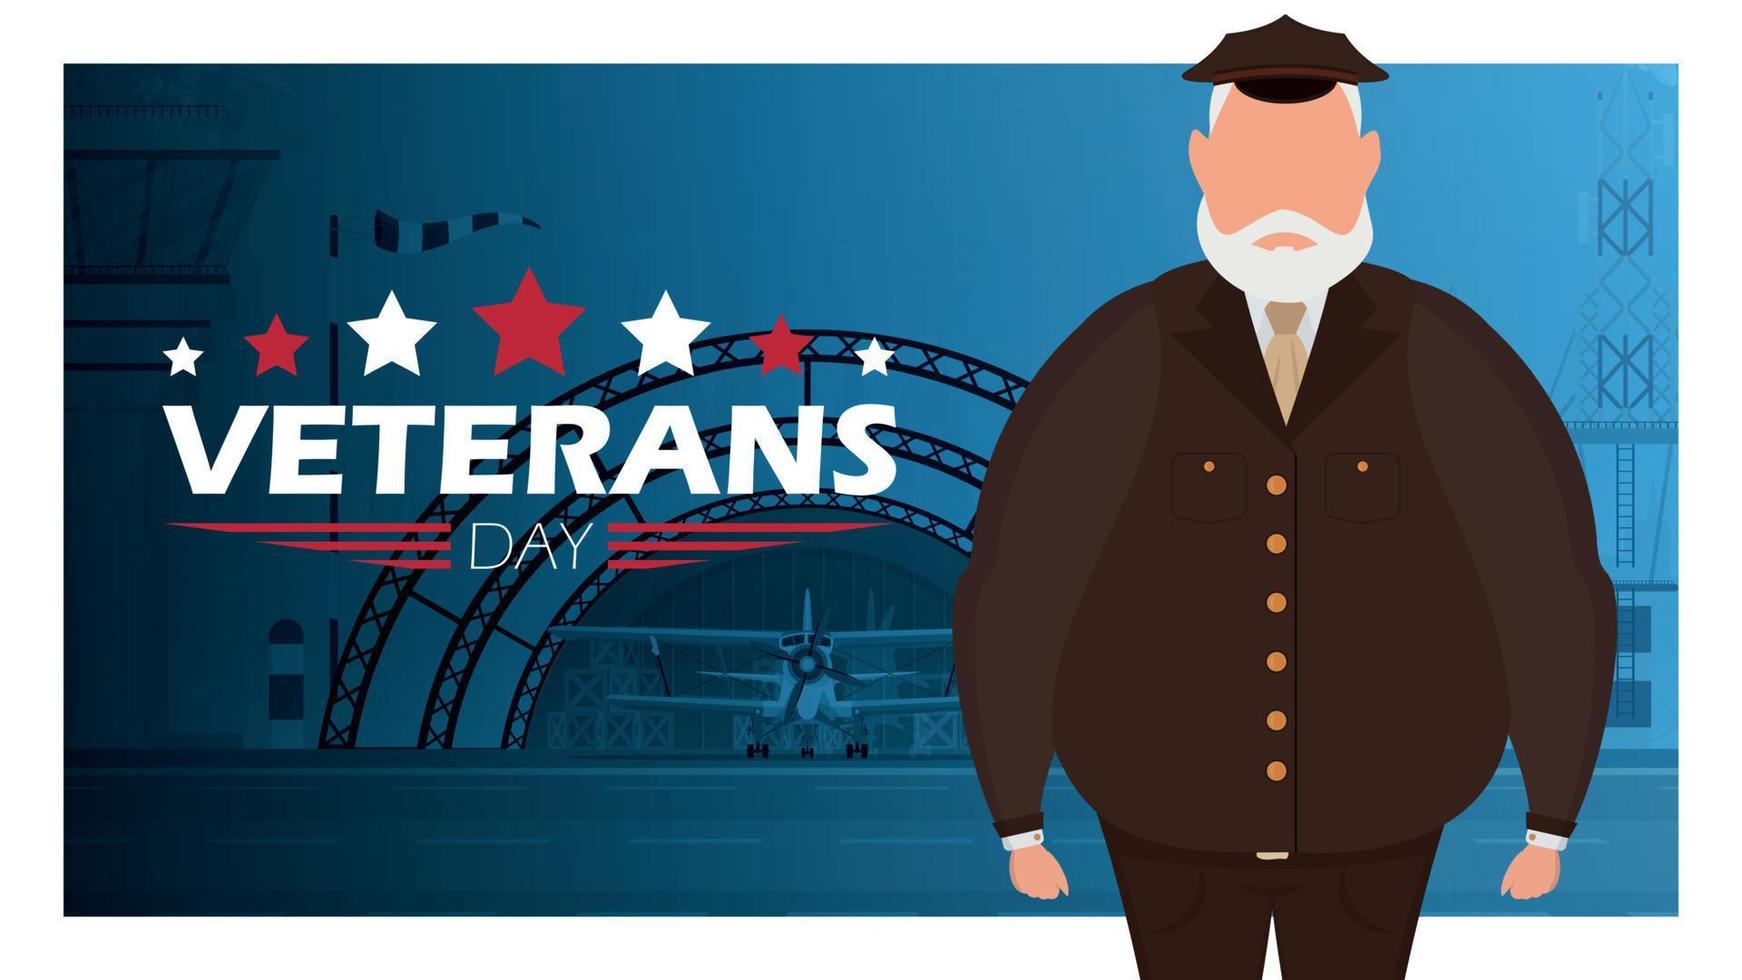 Day of veterans with the best soldier. Vector illustration.